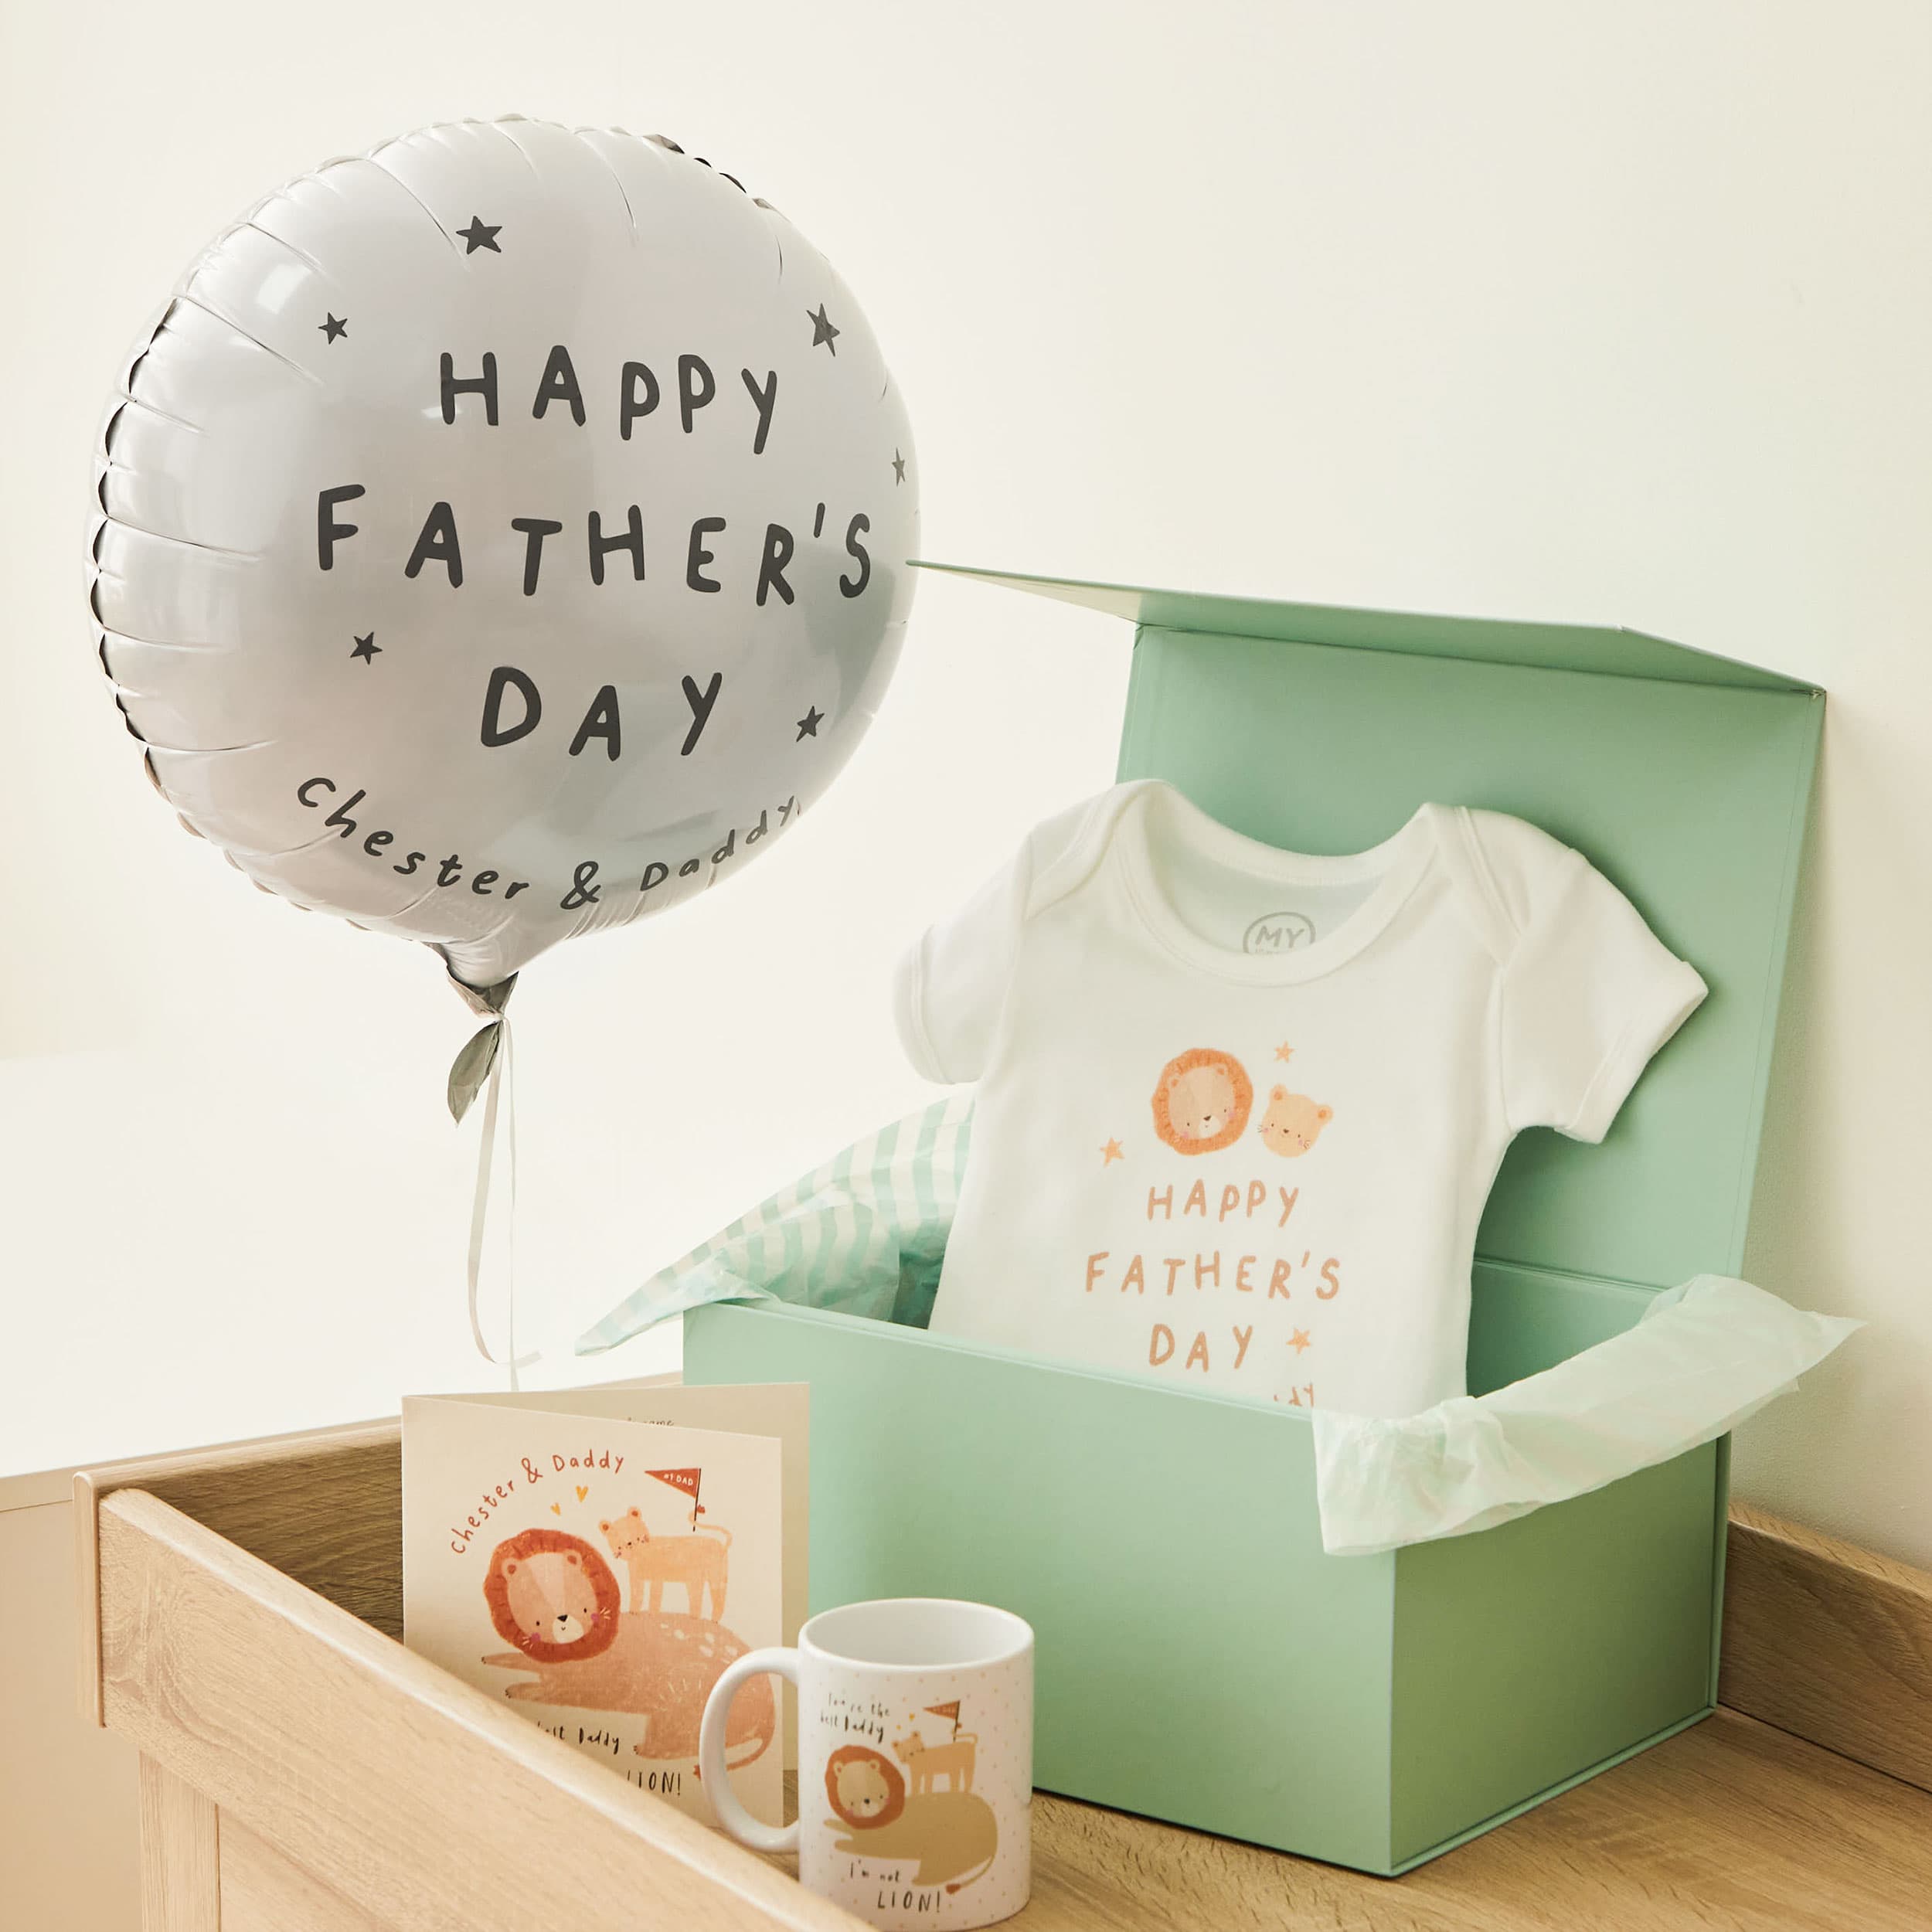 Father's Day Finds: Personalised Gifts to Make Dad's Day Extra Special